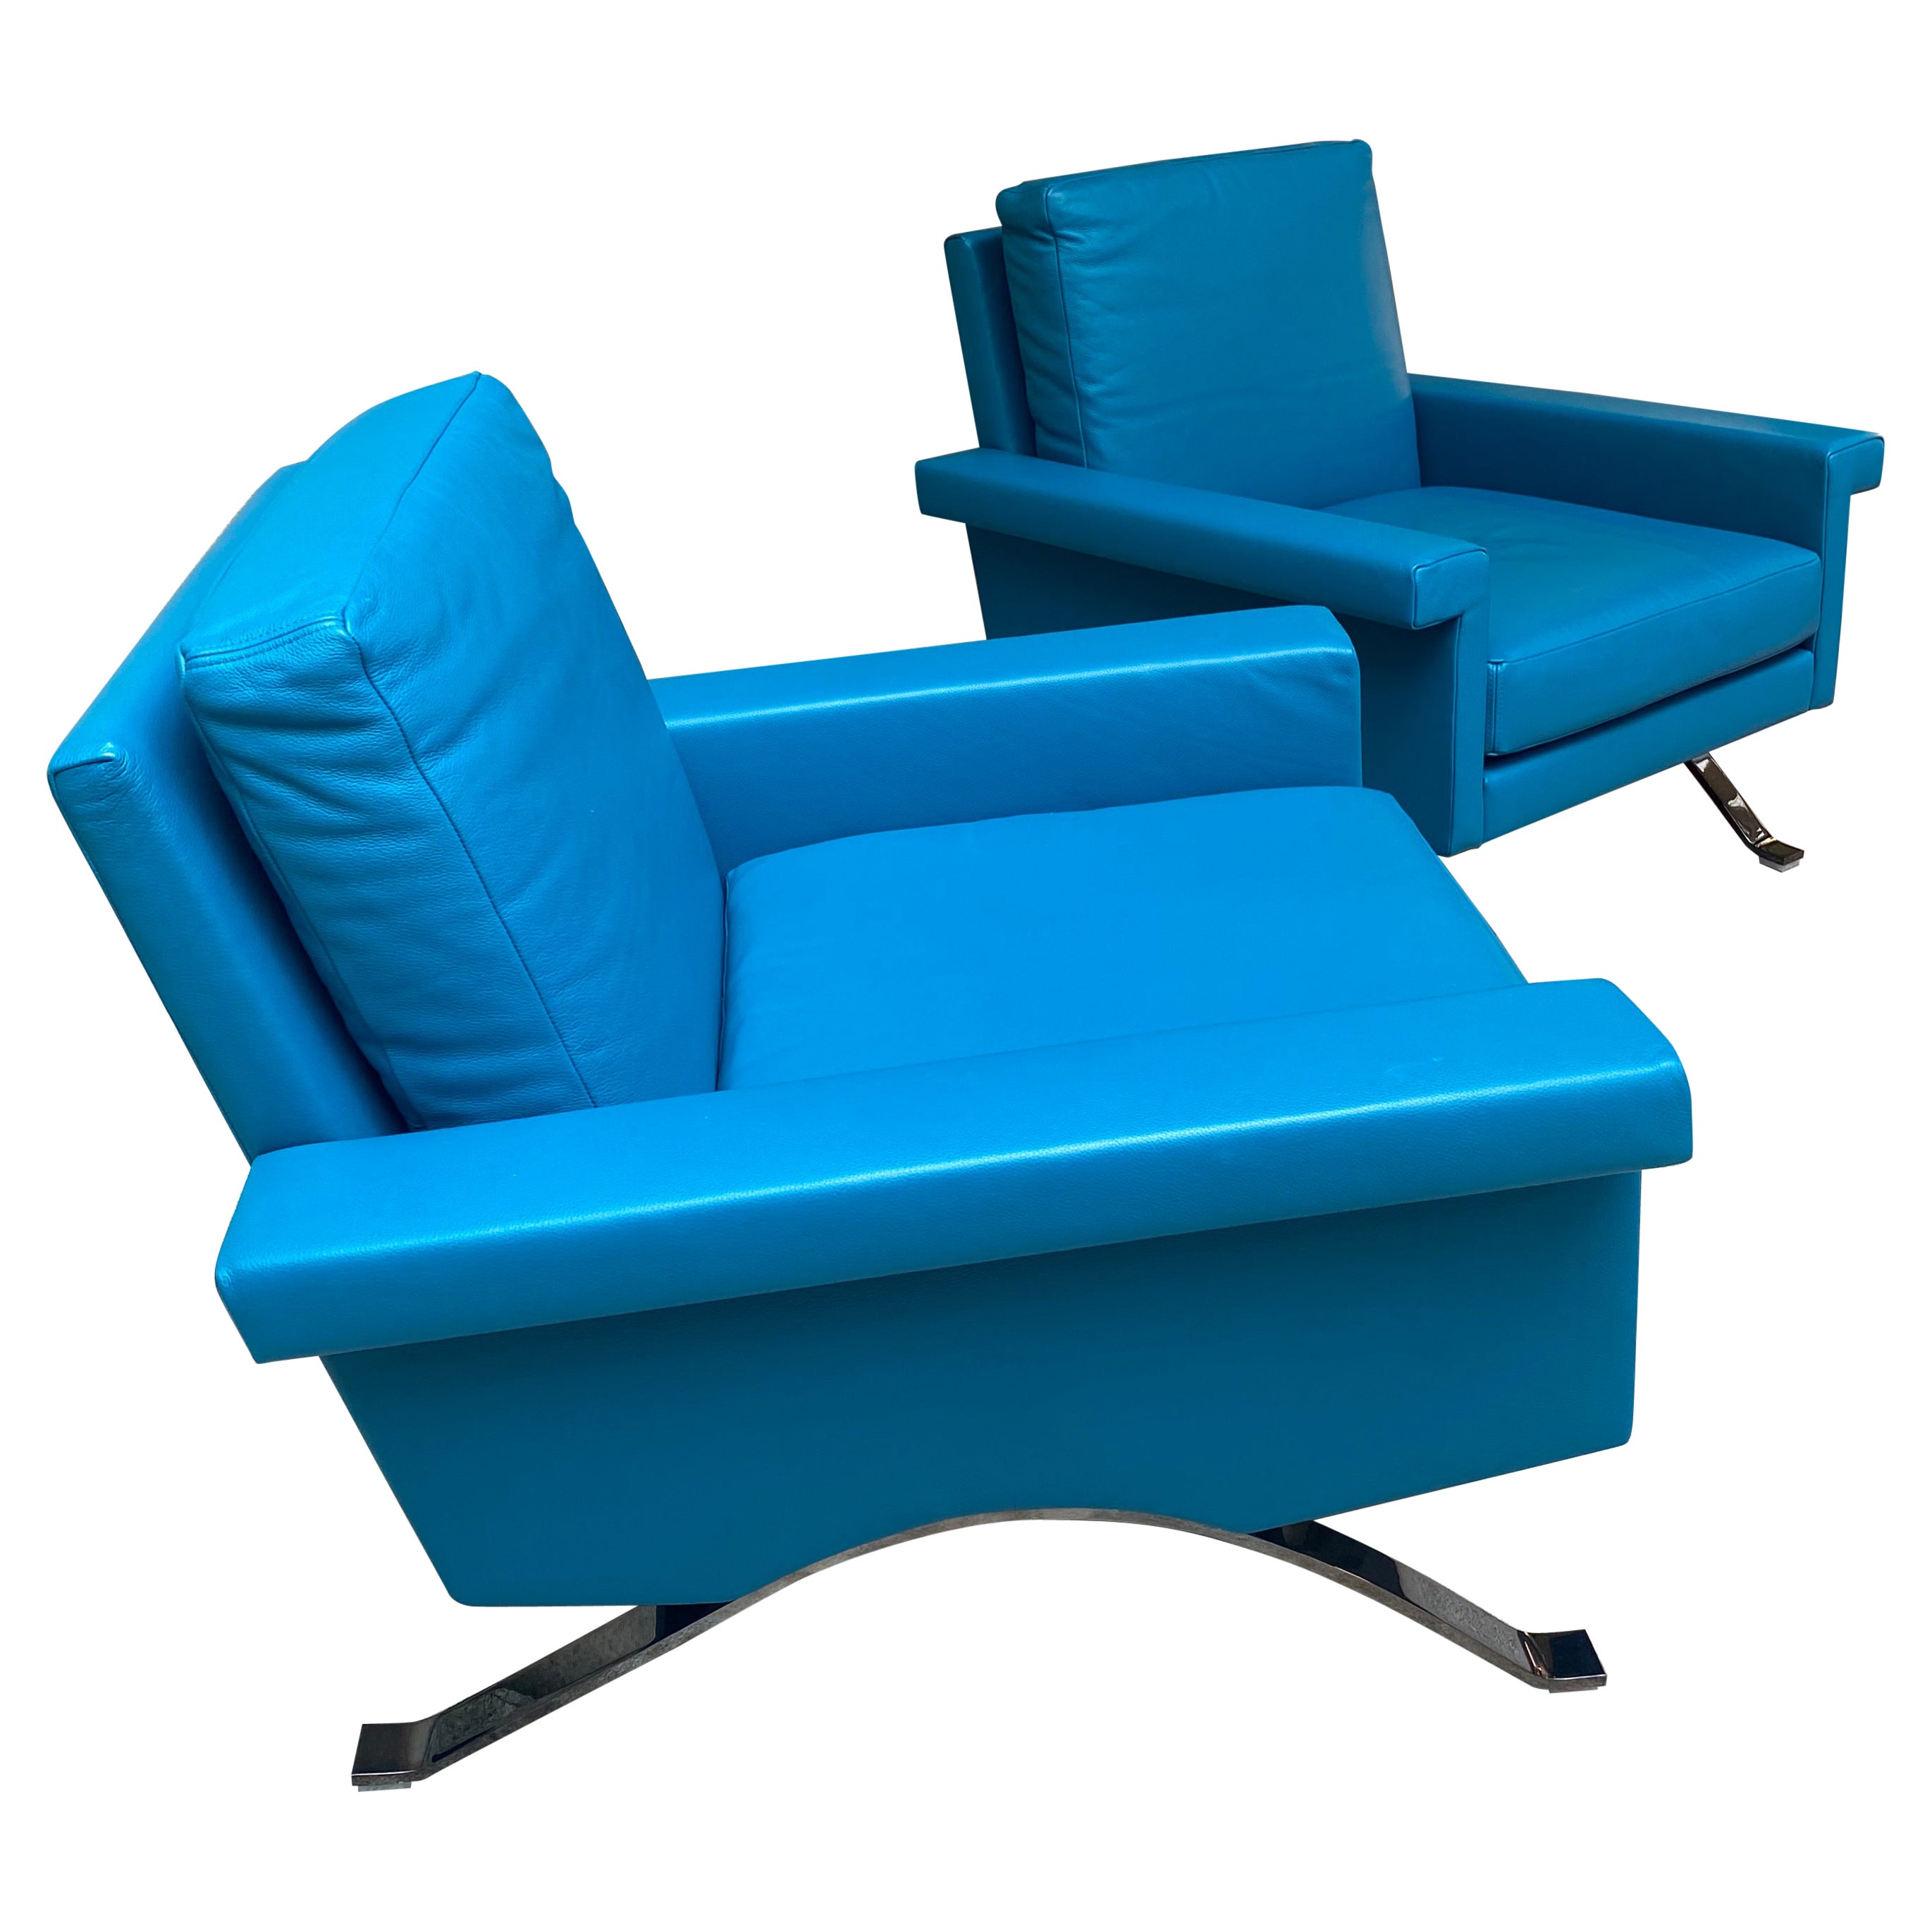 Ico Parisi Pair of armchairs - Lounge ´875´ Cassina Edition For Sale